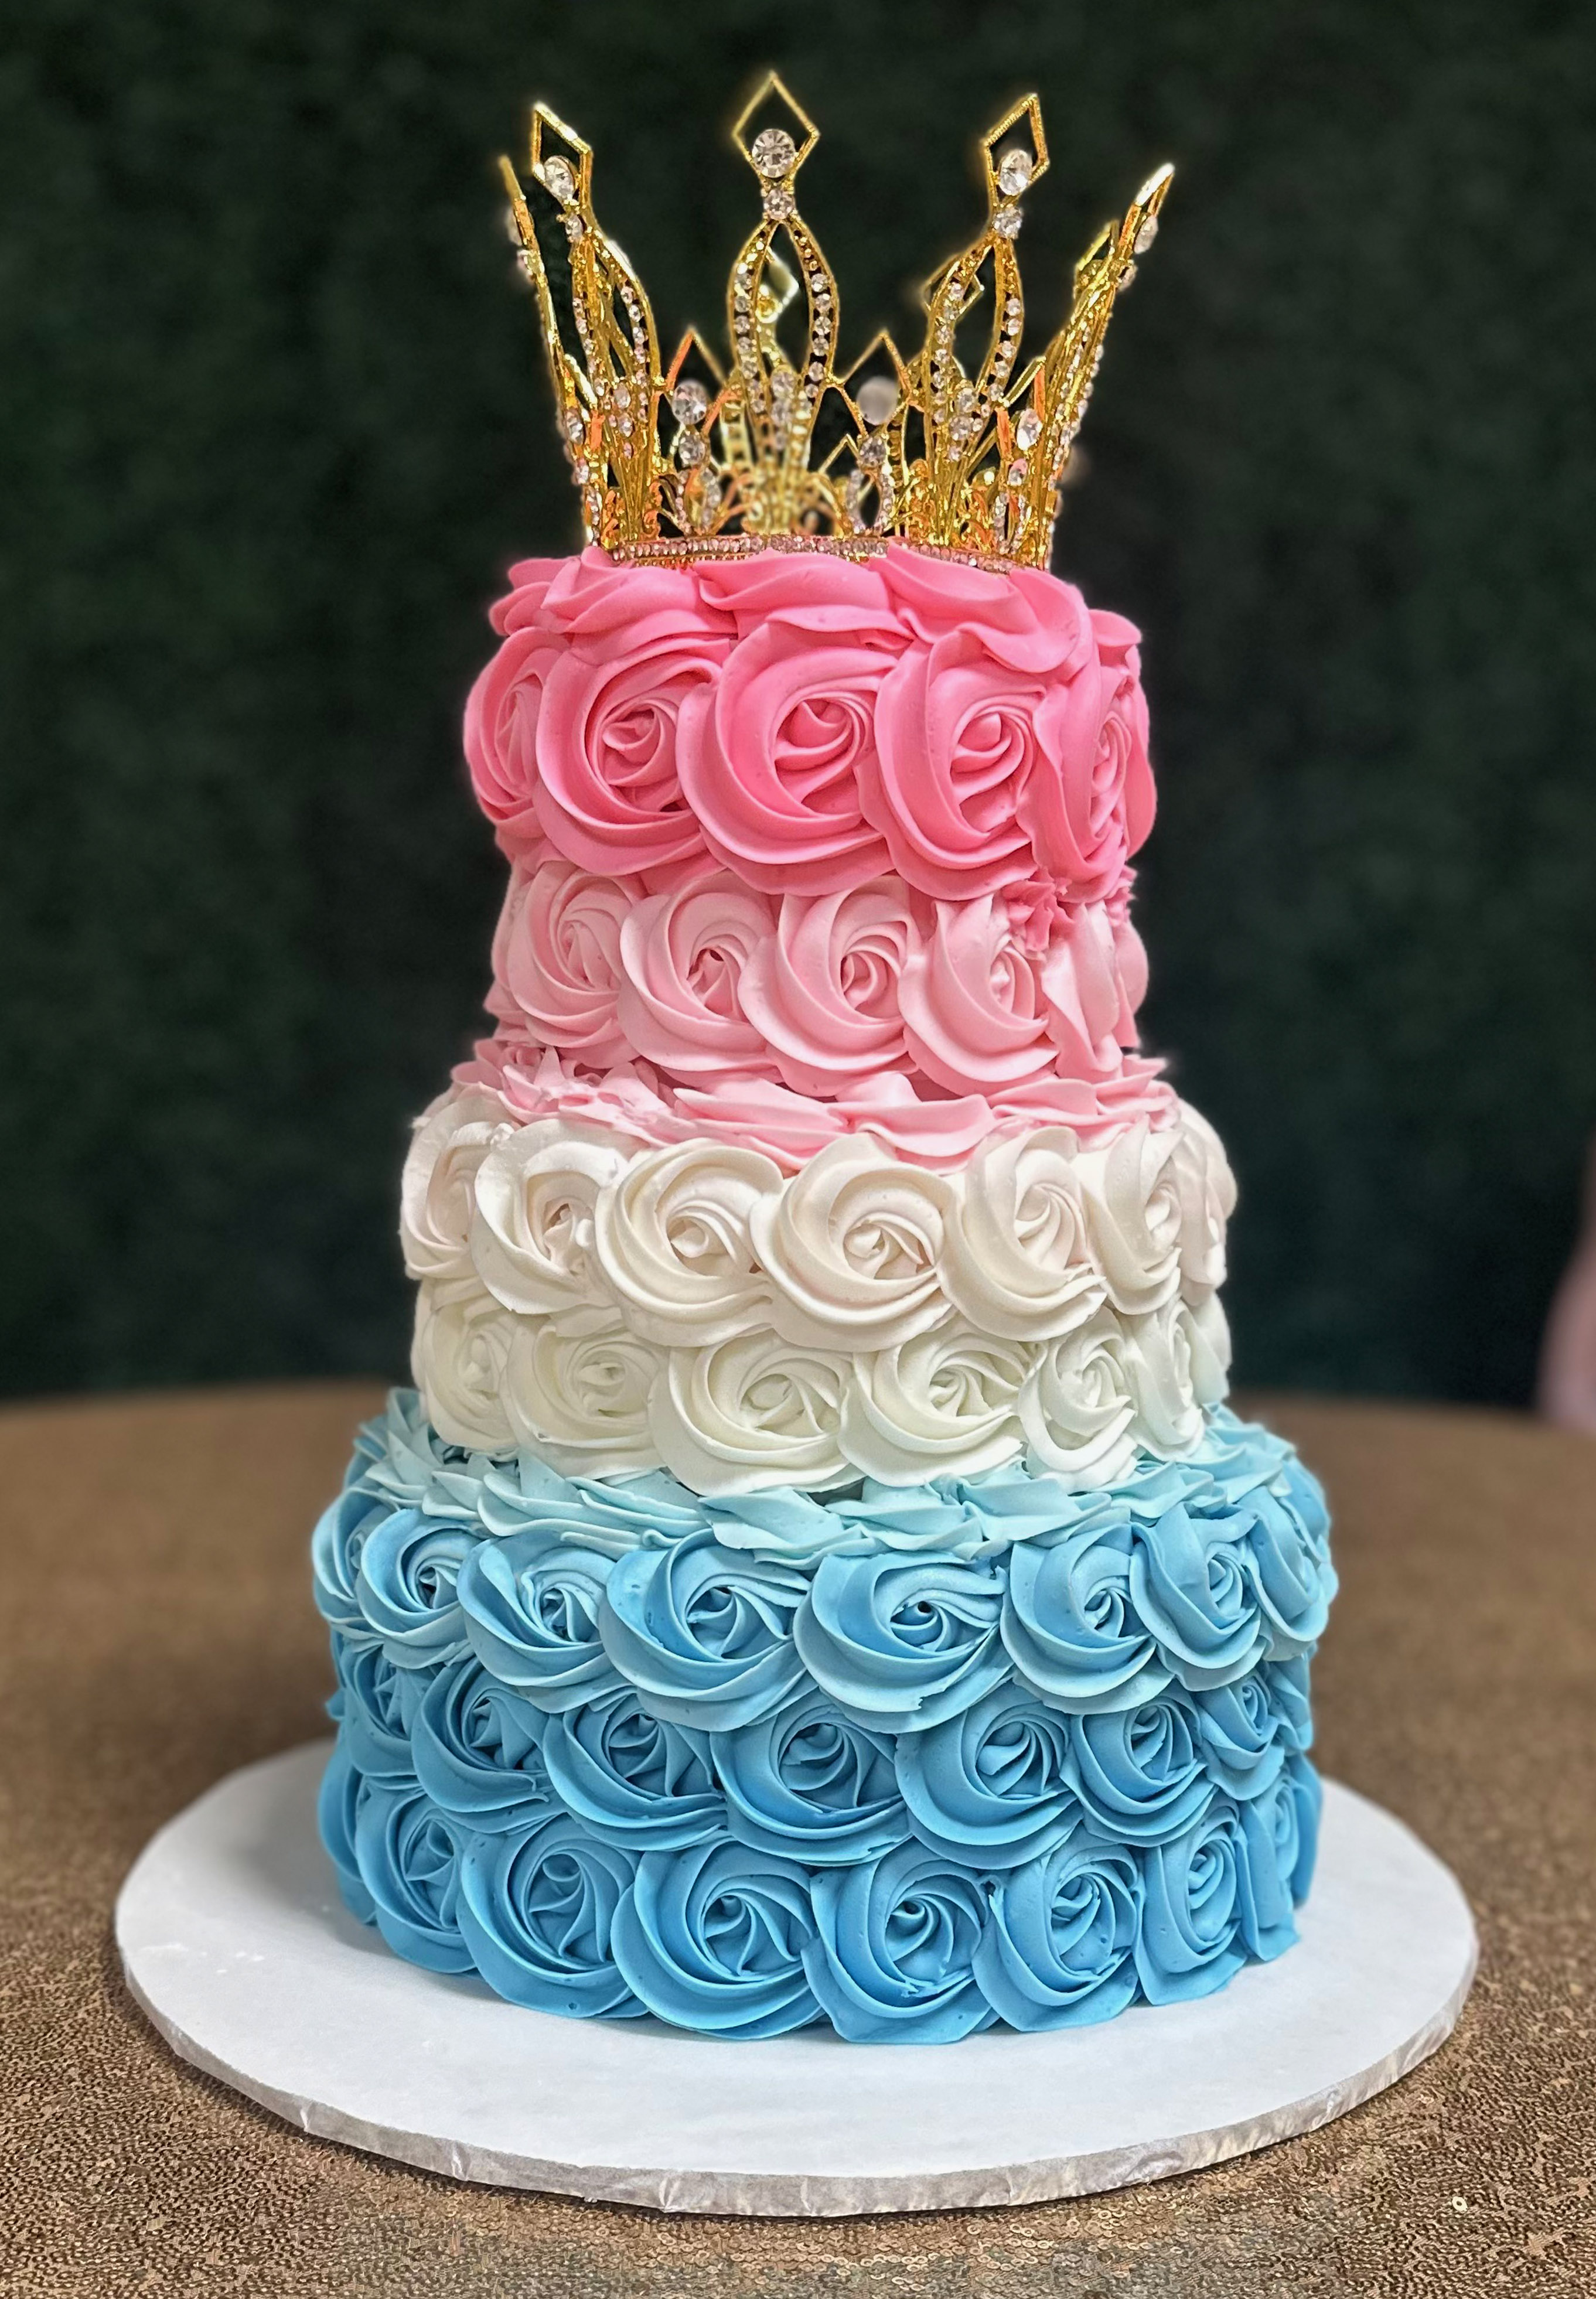 Flower Design Of Cake With Crown On Top